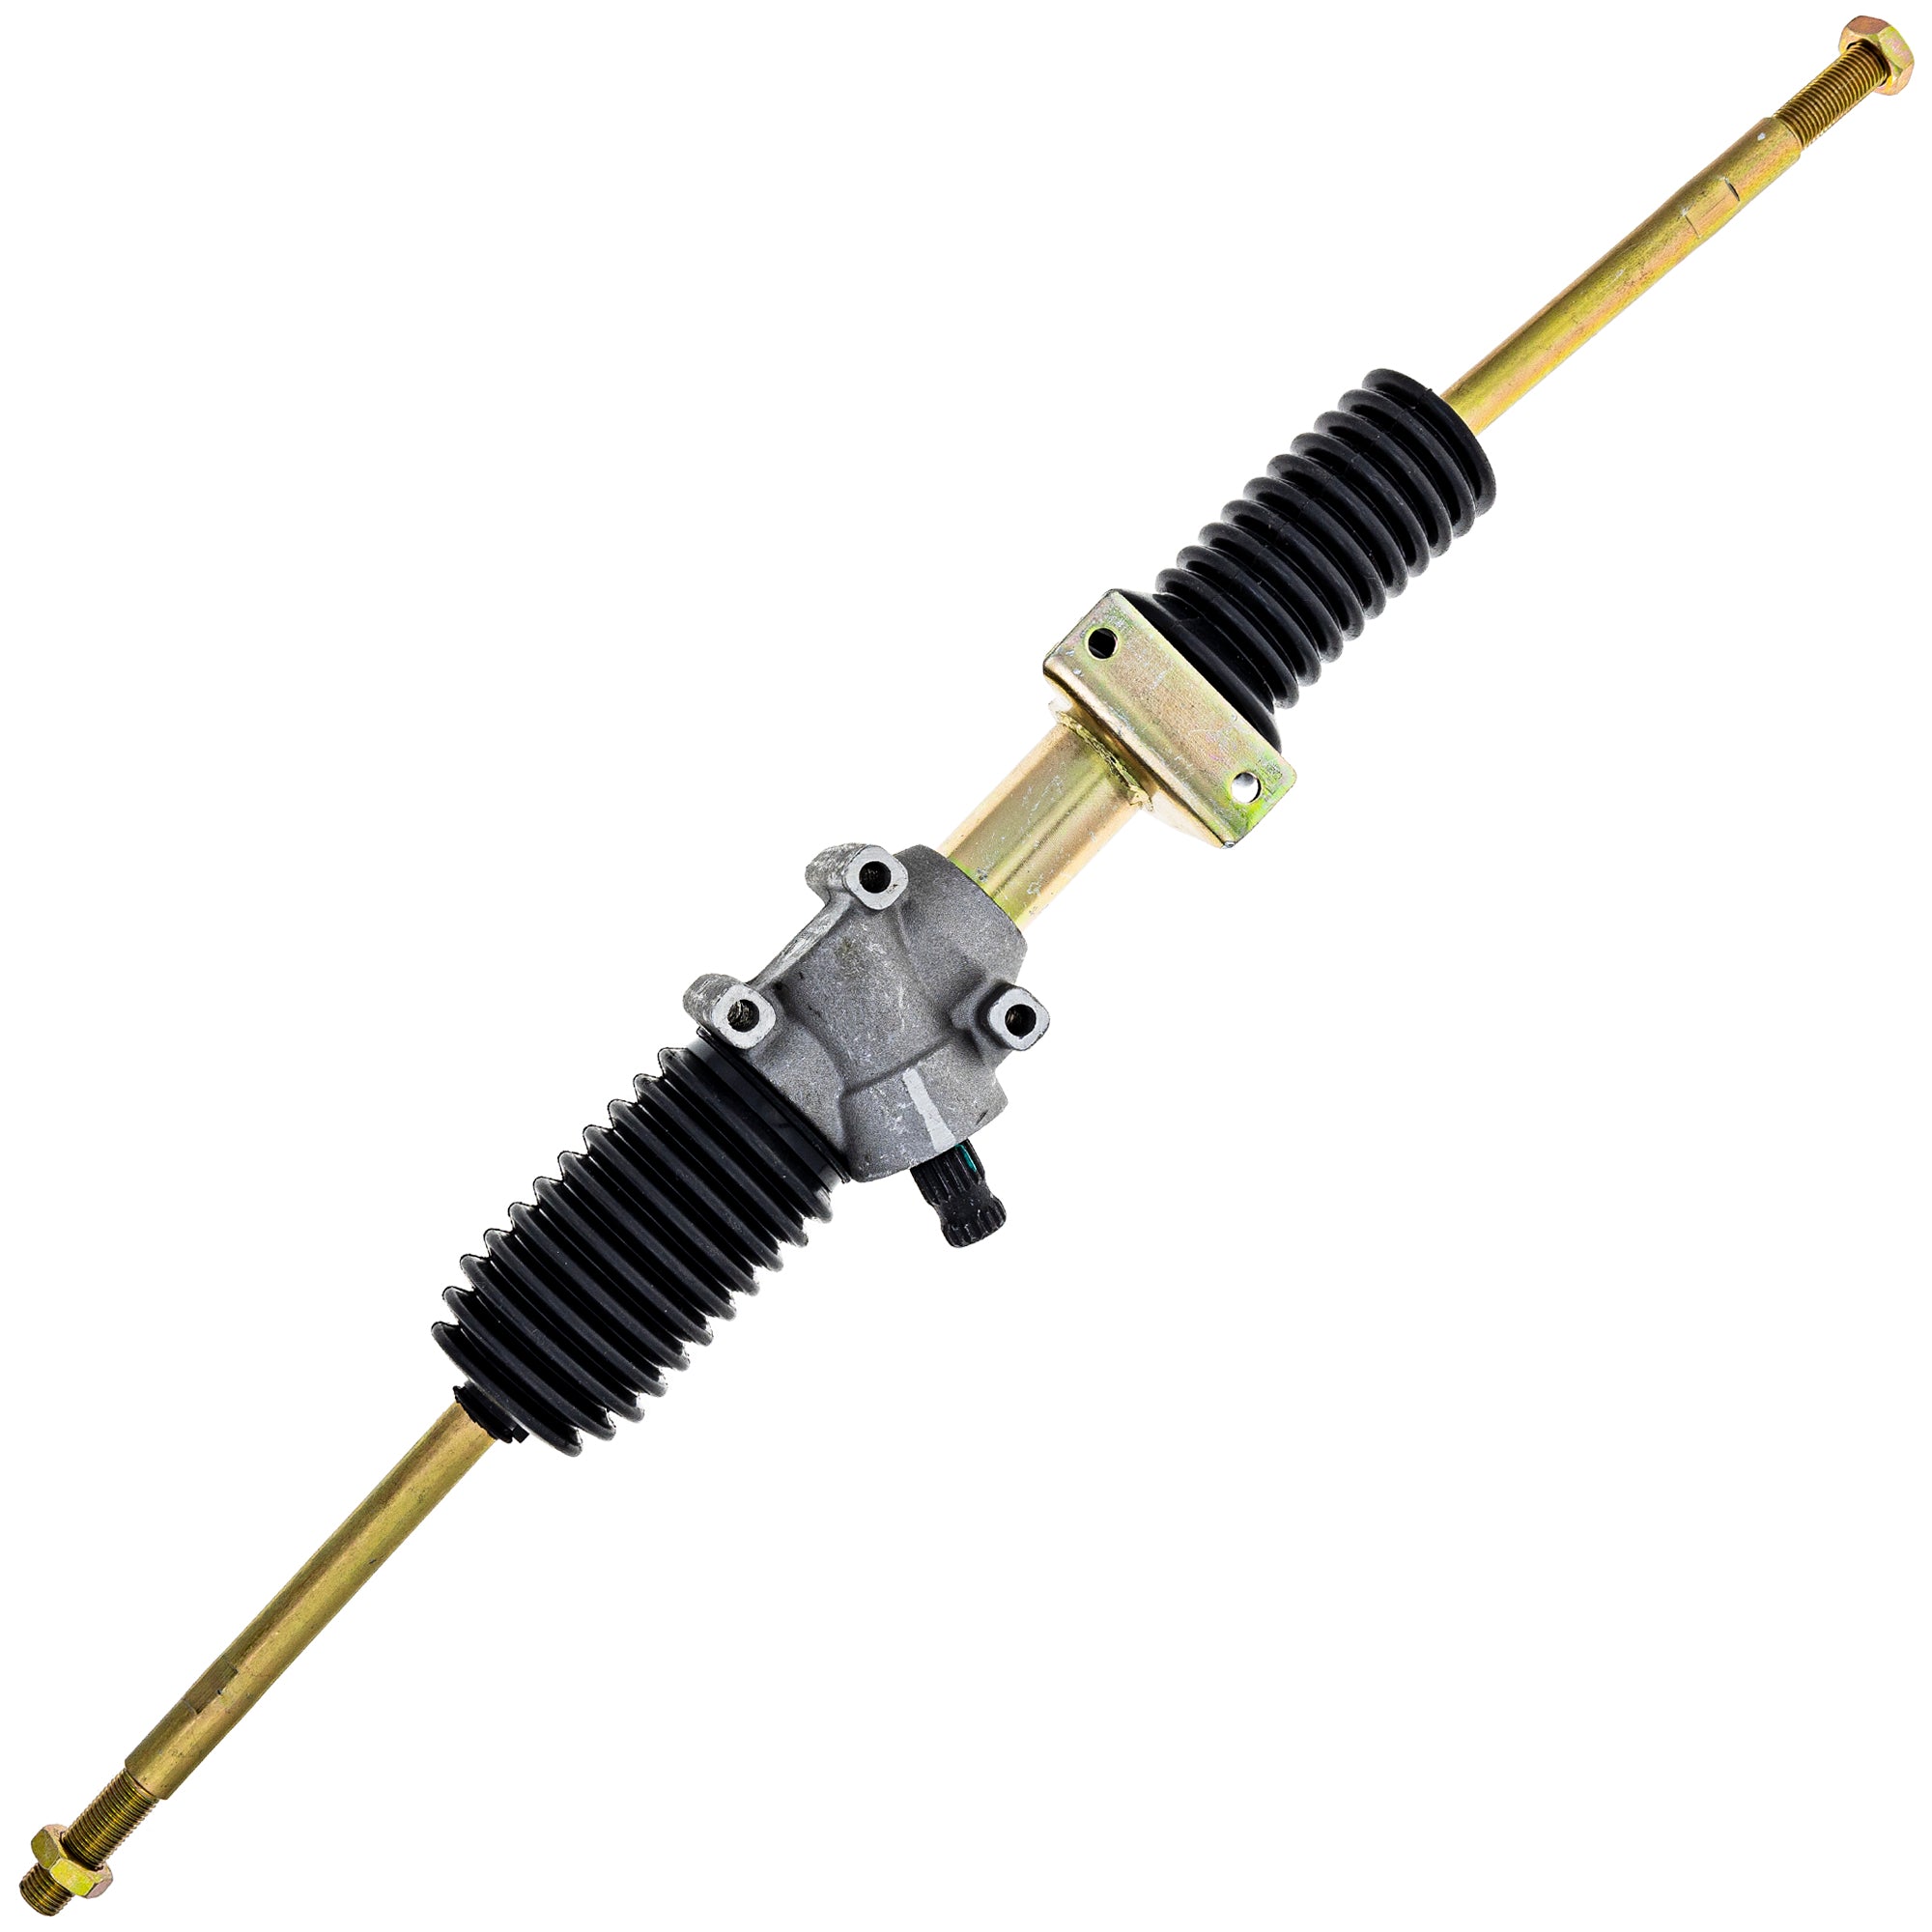 NICHE 519-CSR2254A Steering Rack Assembly for Polaris RZR